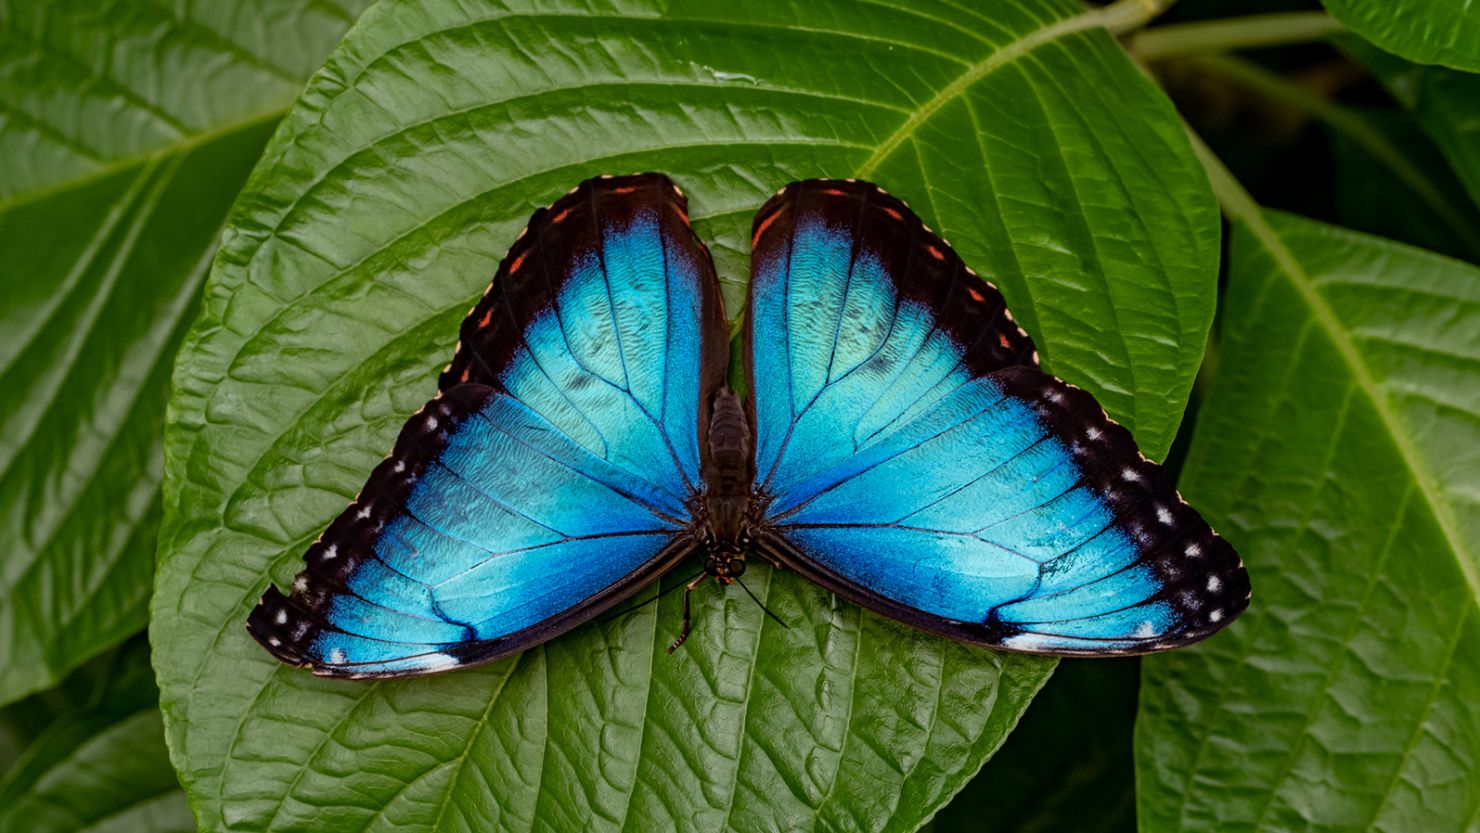 A Guide to Stunning Butterfly Photography (17 Expert Tips)